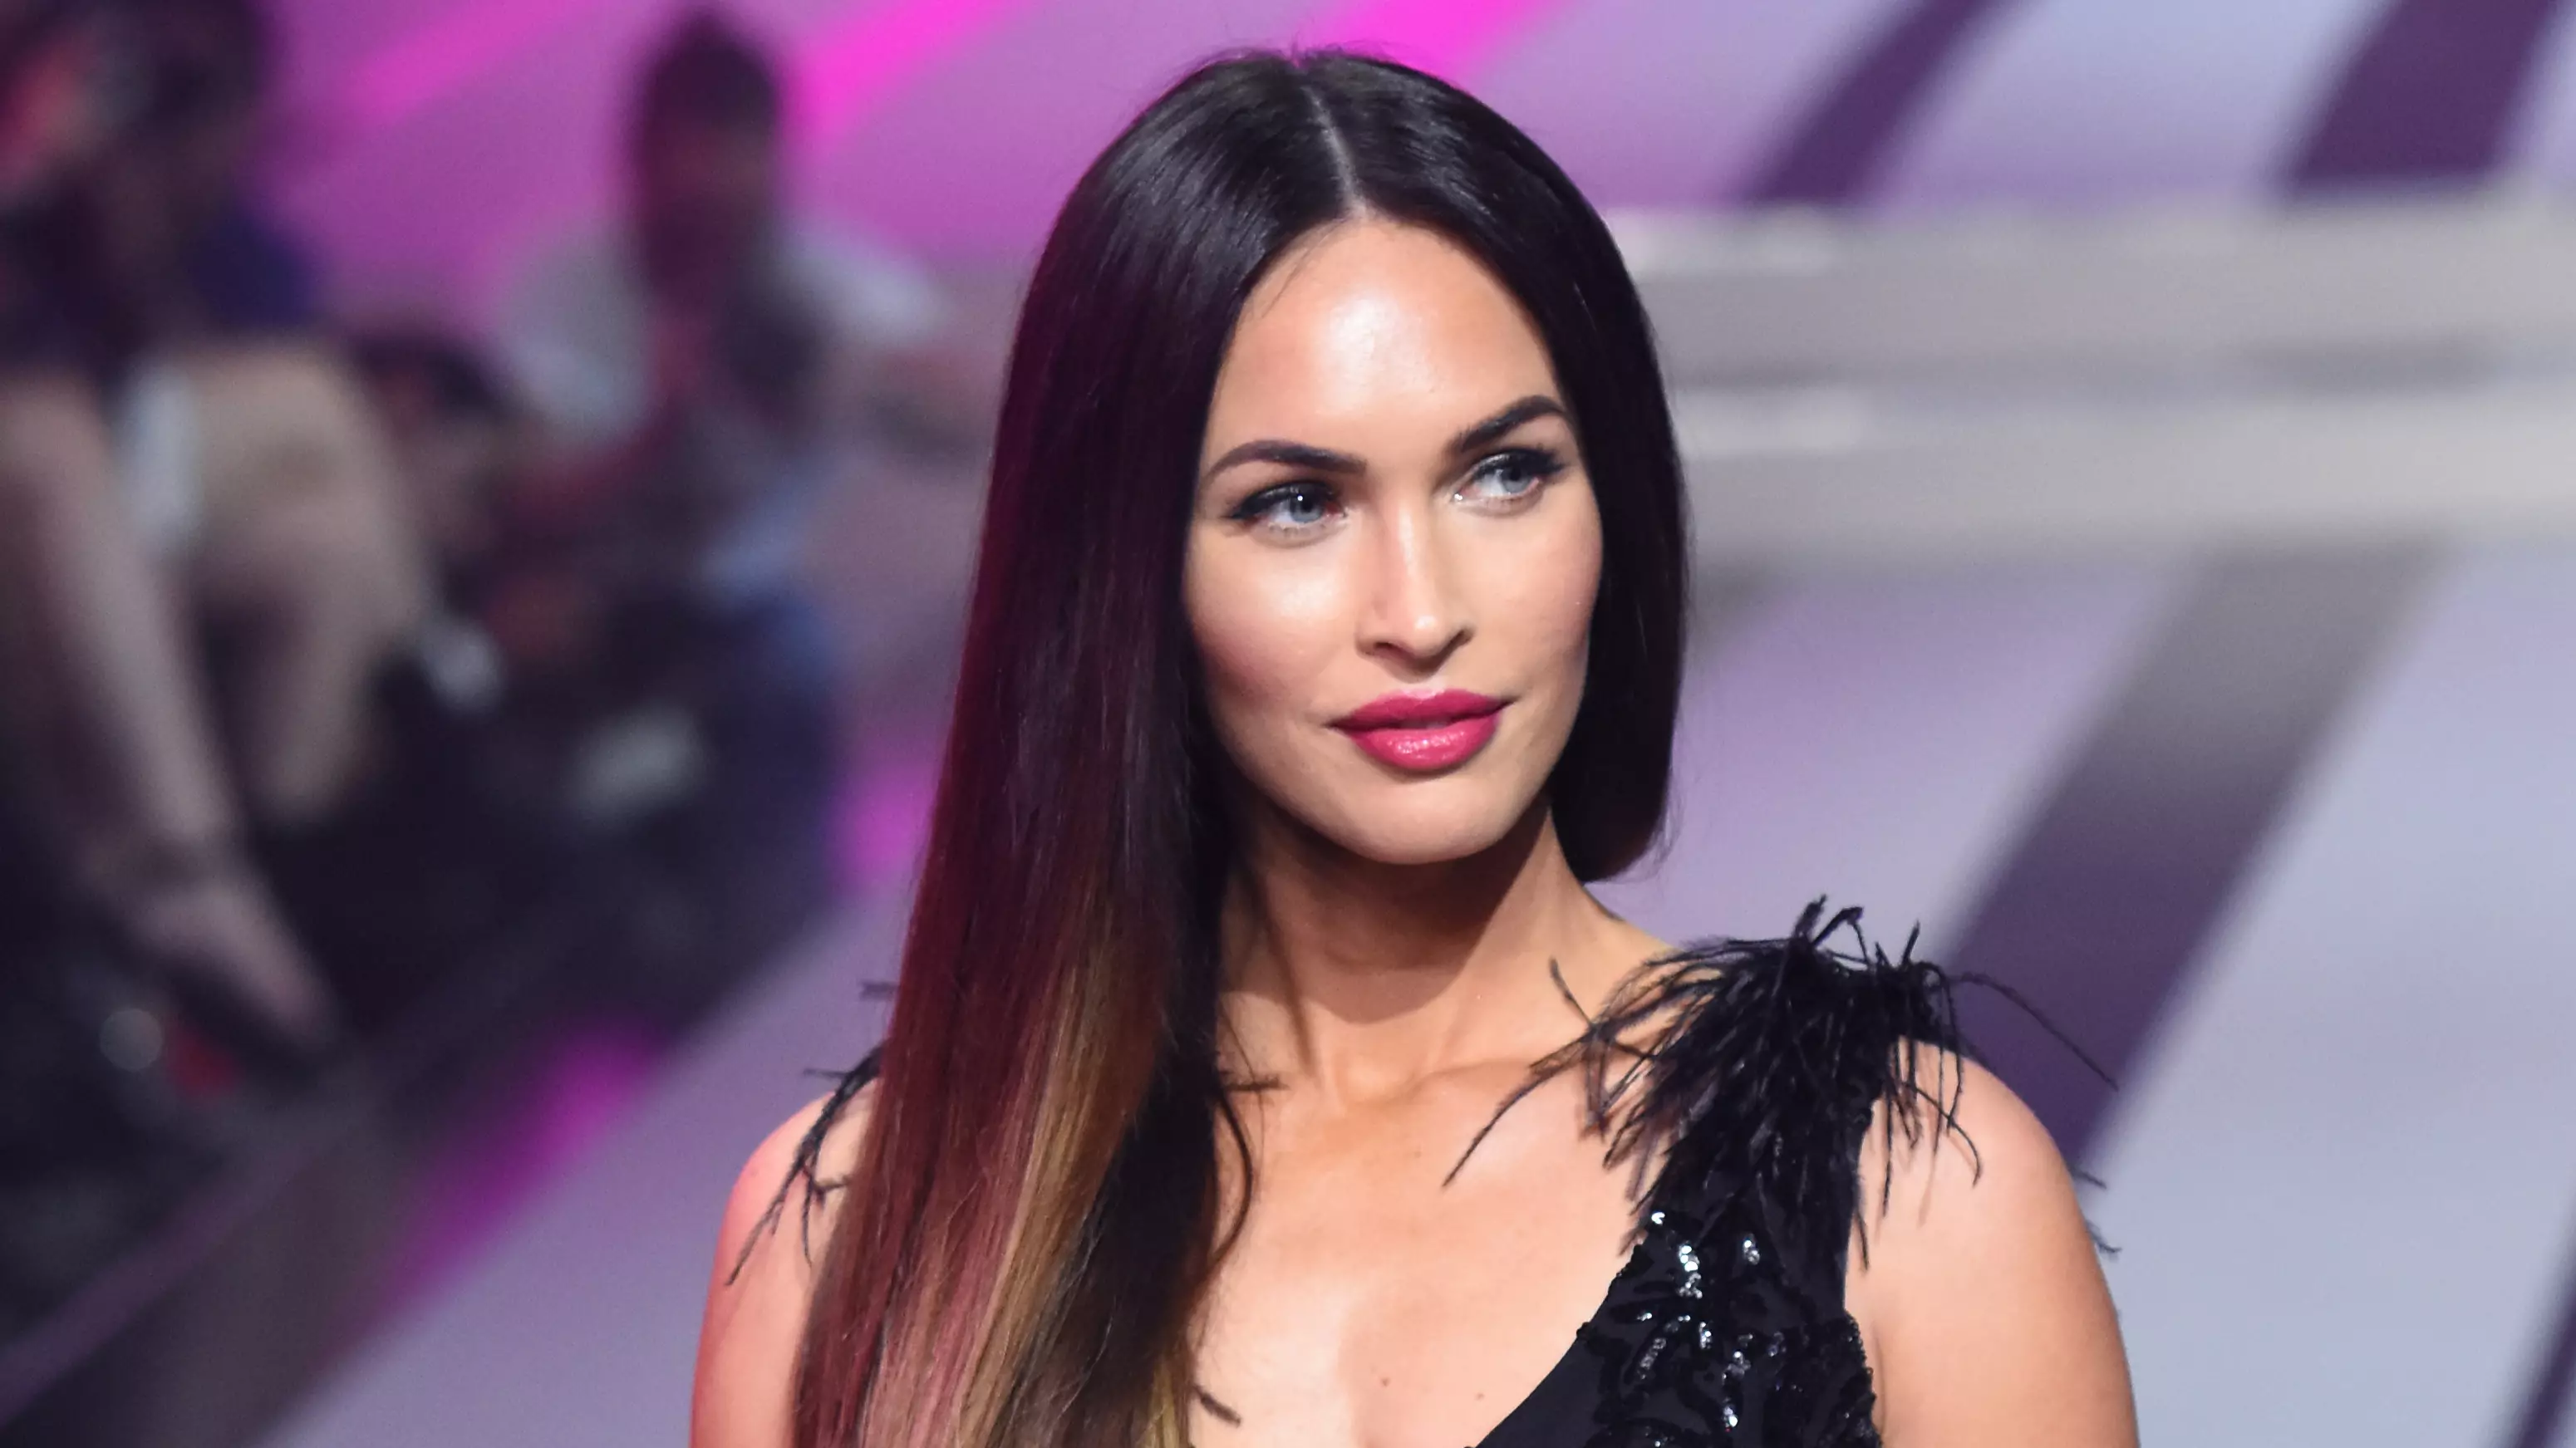 Megan Fox Says People Tried To Make Her 'Less Sexy' Early In Her Career